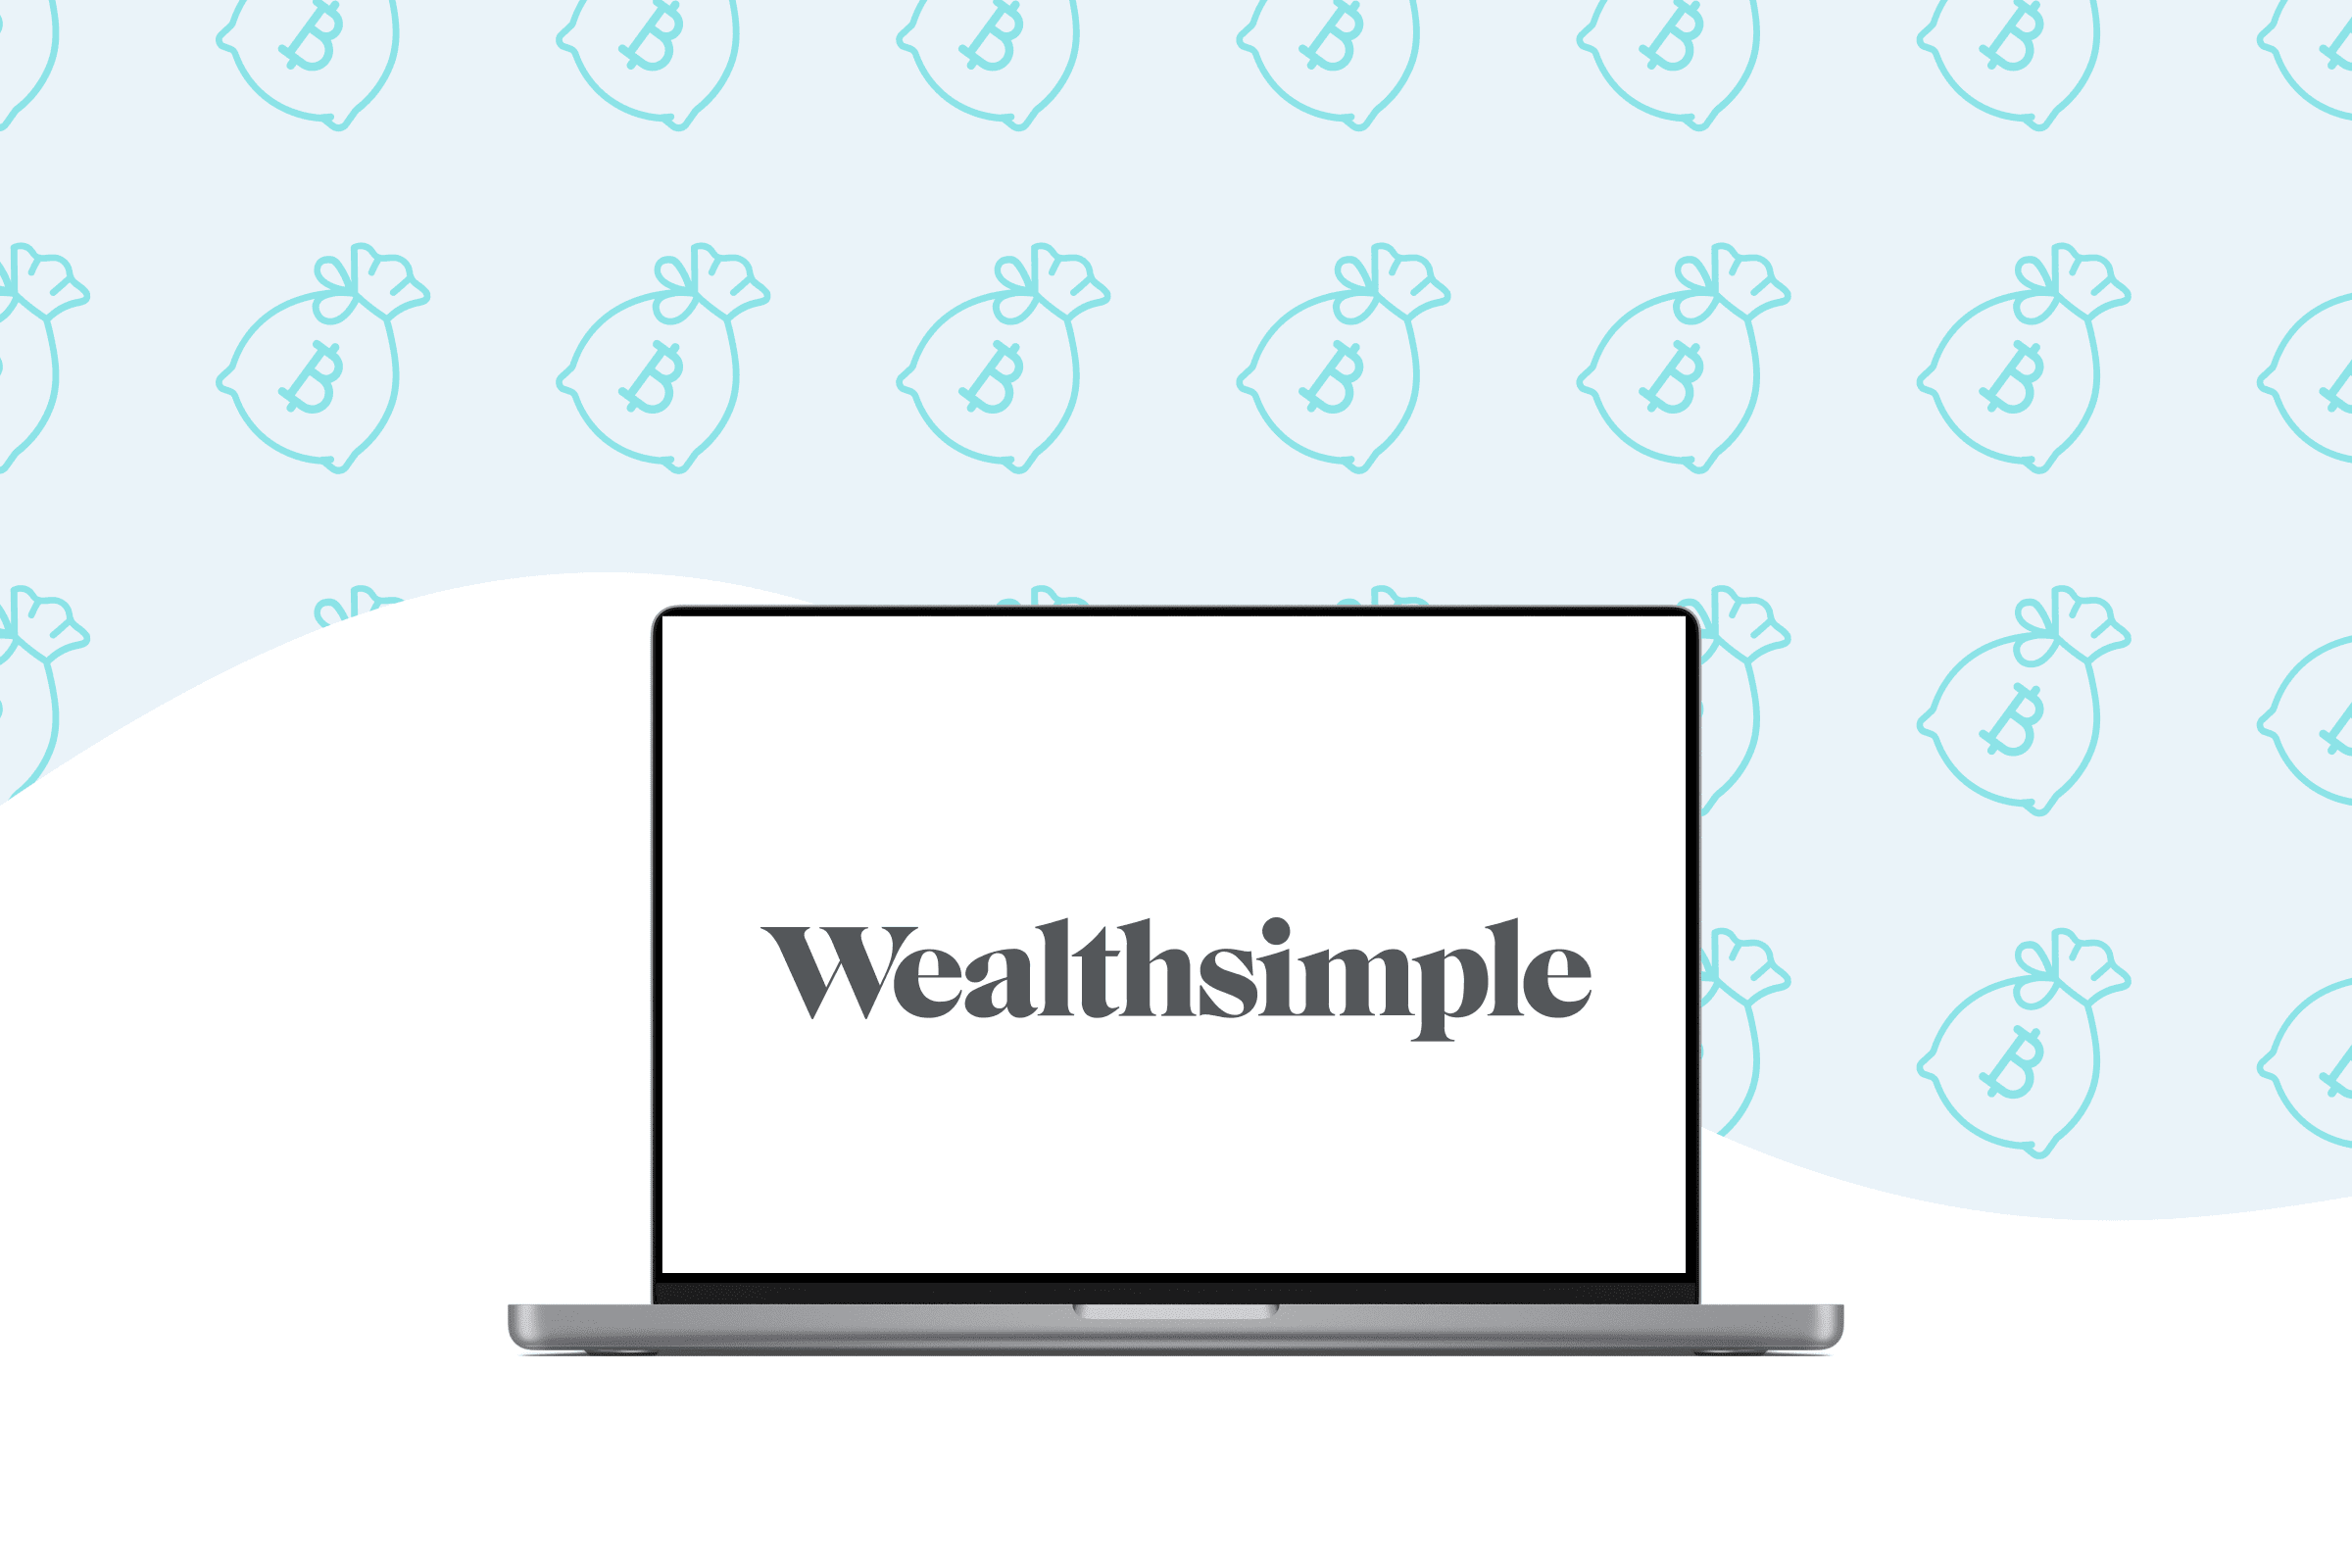 A step-by-step guide on making money with Wealthsimple, a reliable investment platform